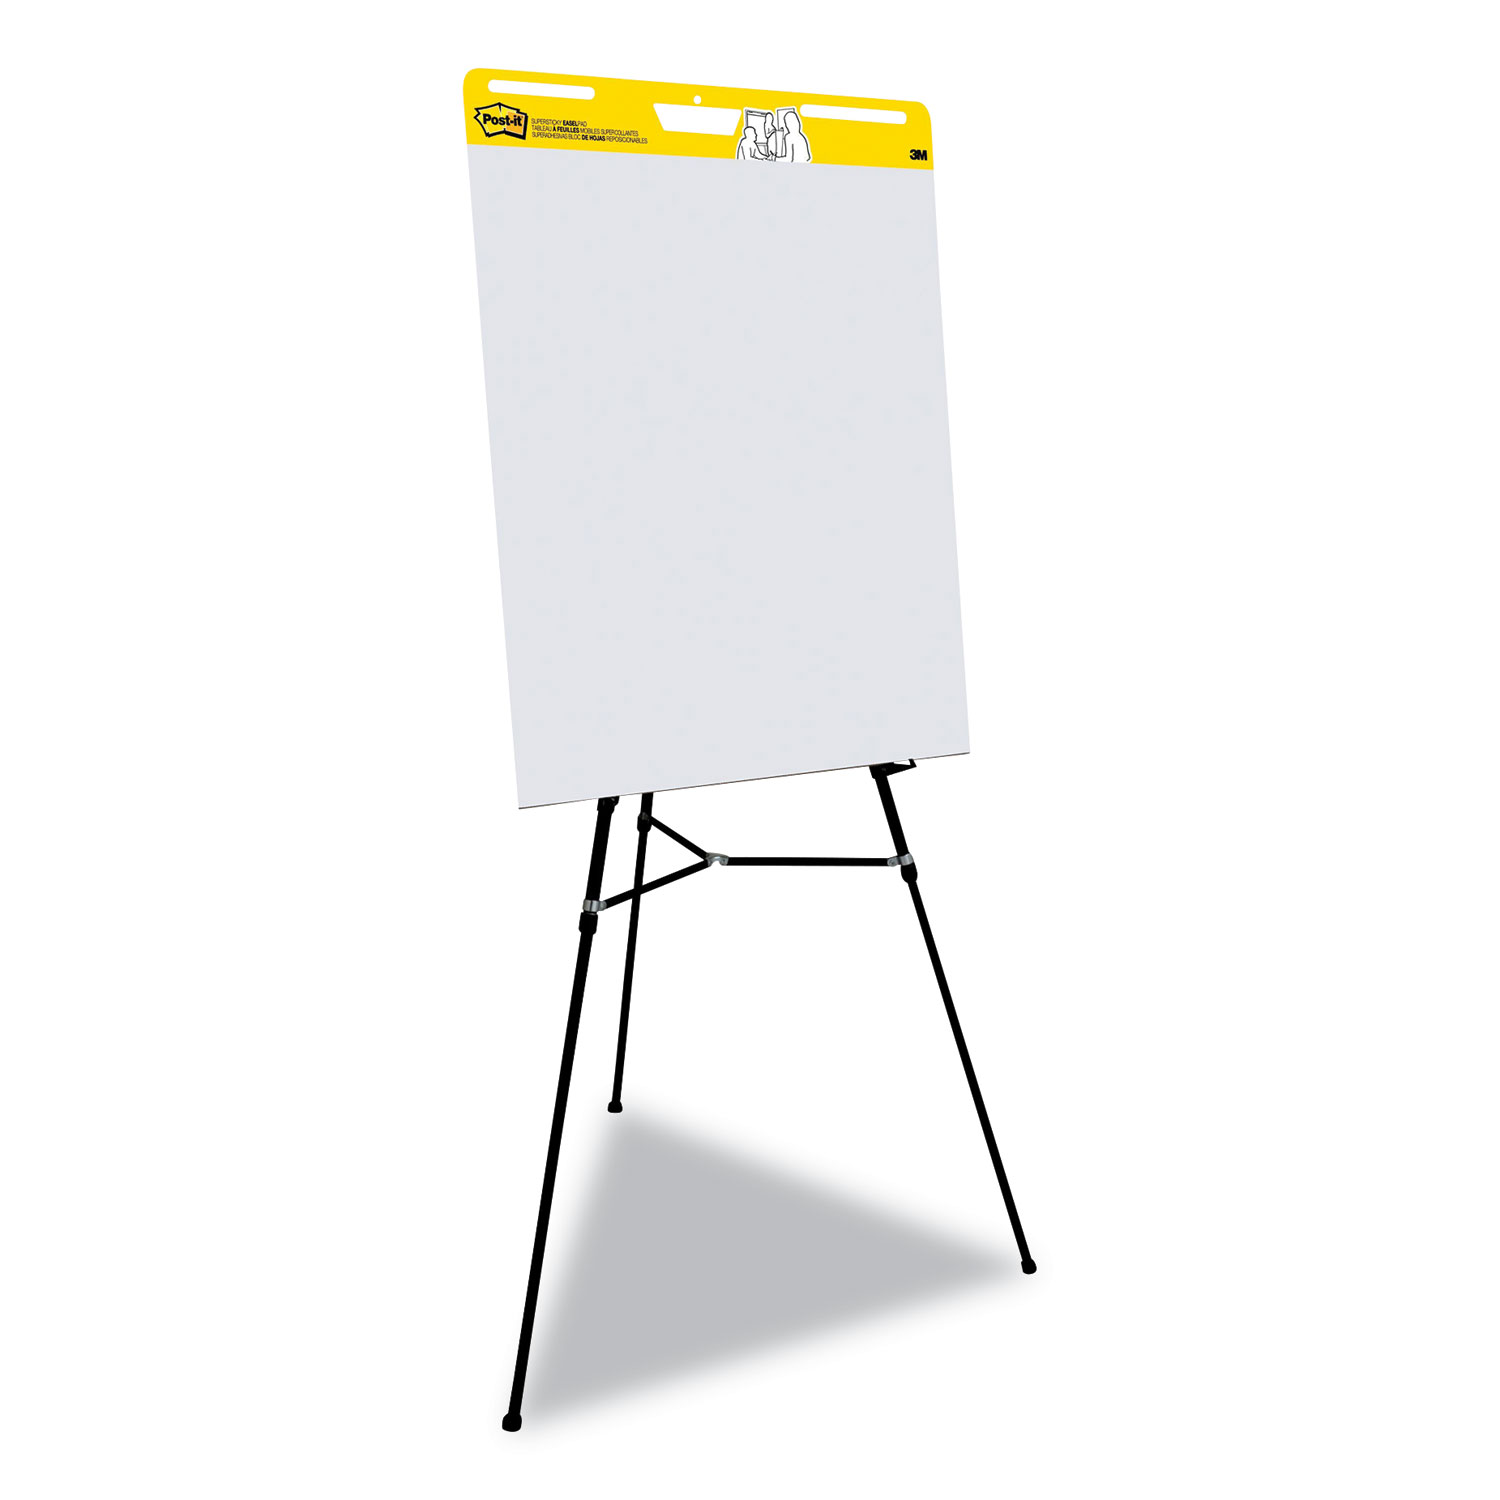 Vertical-Orientation Self-Stick Easel Pad Value Pack, Presentation Format  (1.5 Rule), 25 x 30, Yellow, 30 Sheets, 4/Carton